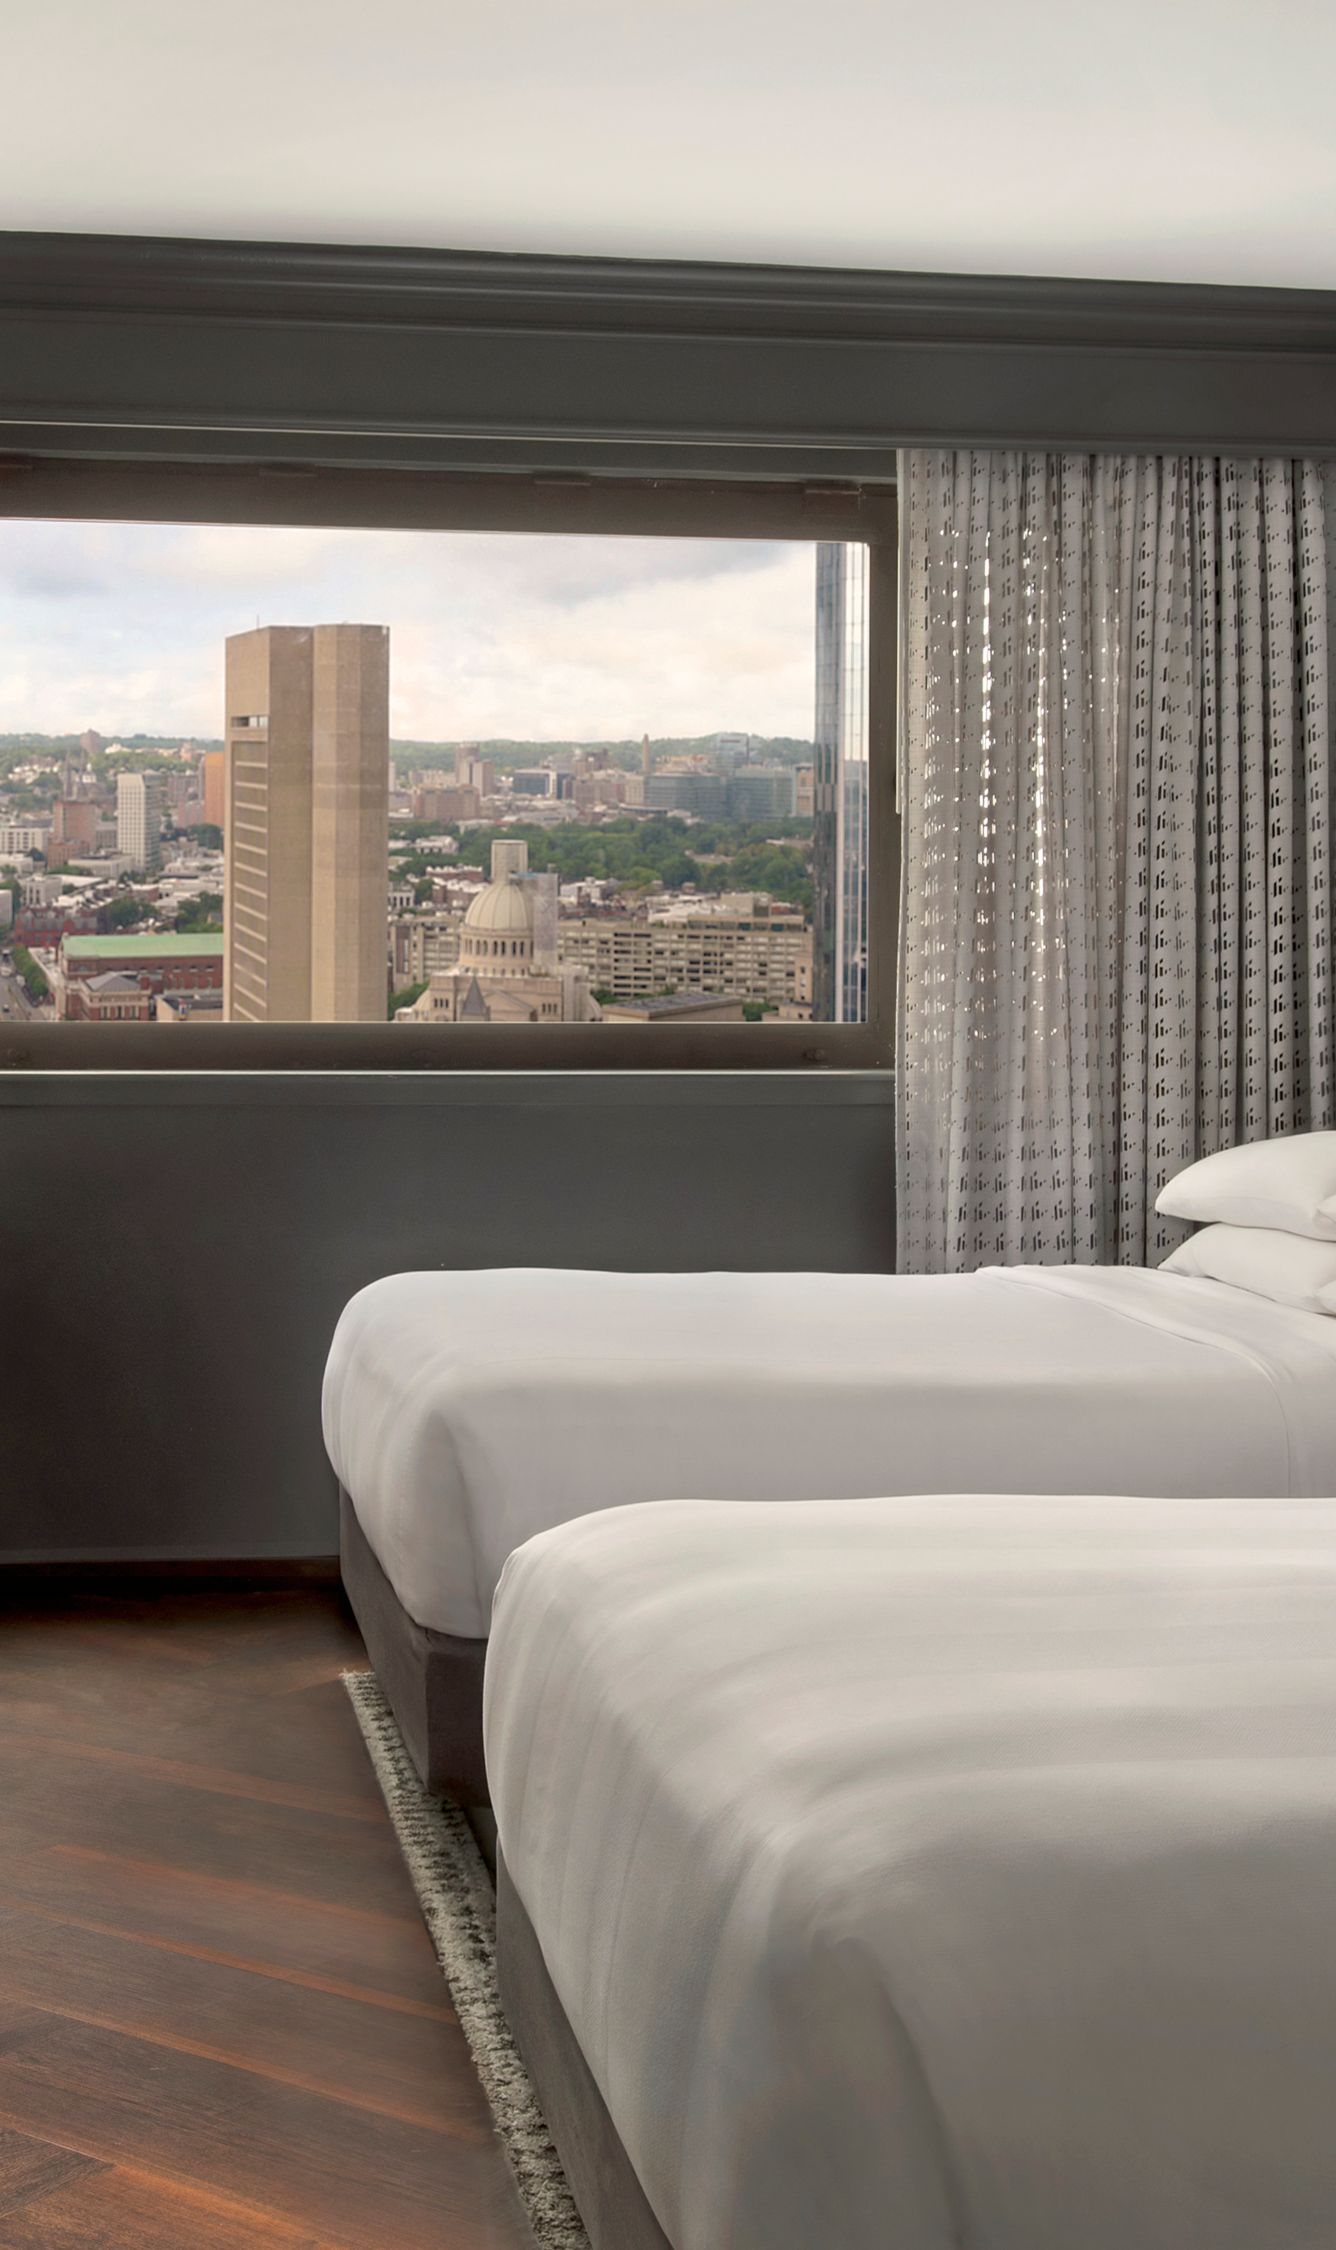 Boston Marriott Copley Place Review: What To REALLY Expect If You Stay